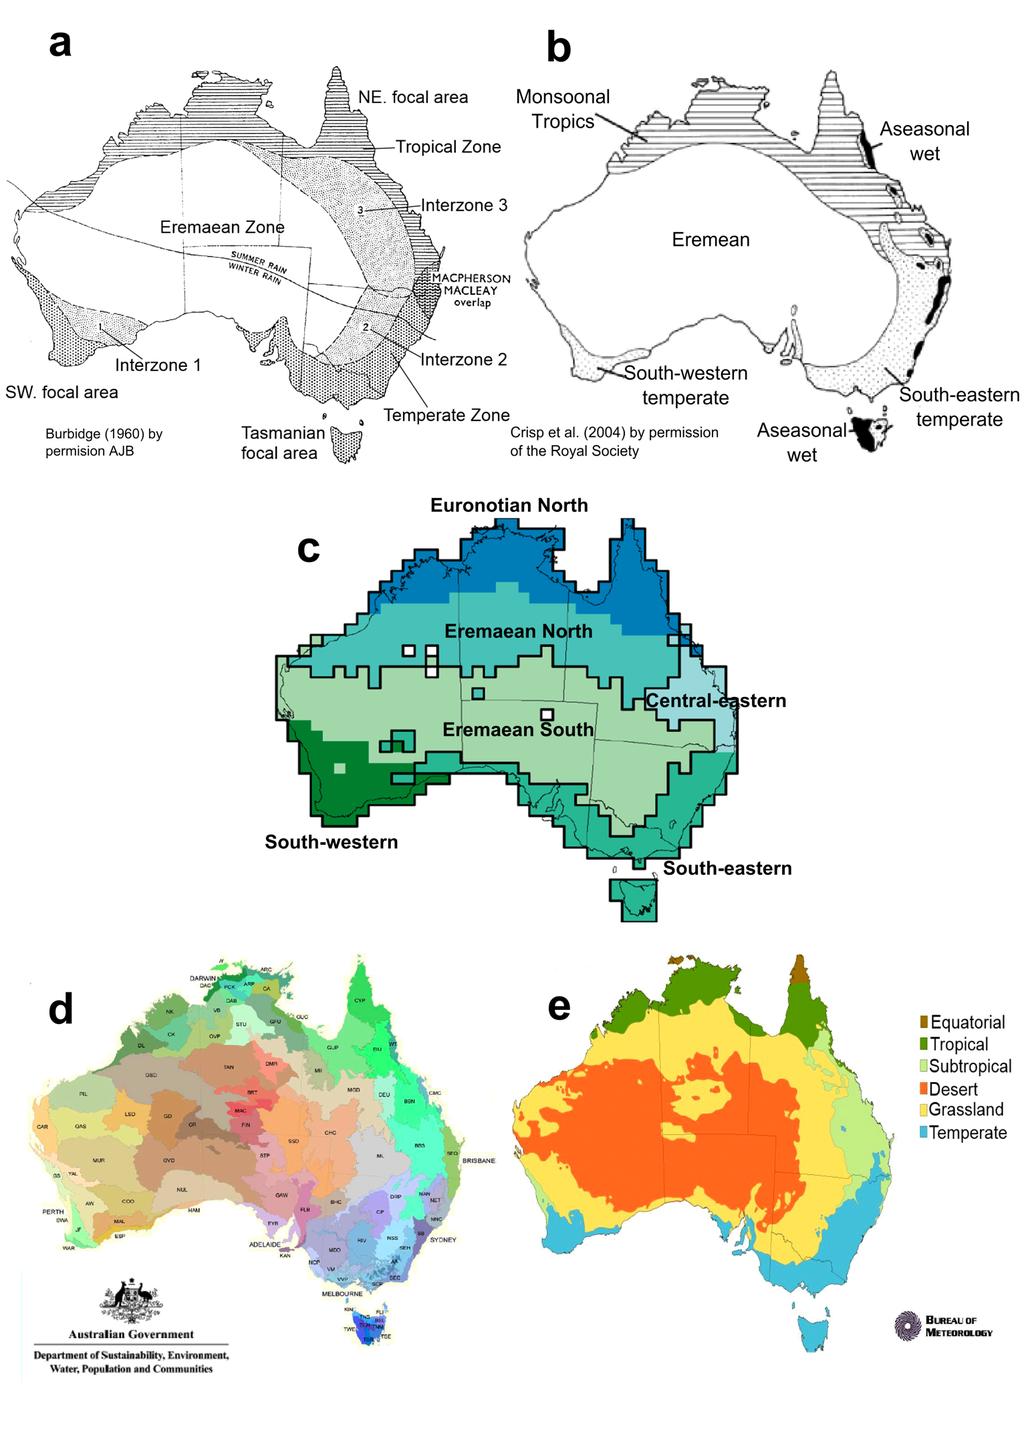 Comparison of our six phytogeographical regions of Australian flora (c) against major biogeographical classifications of